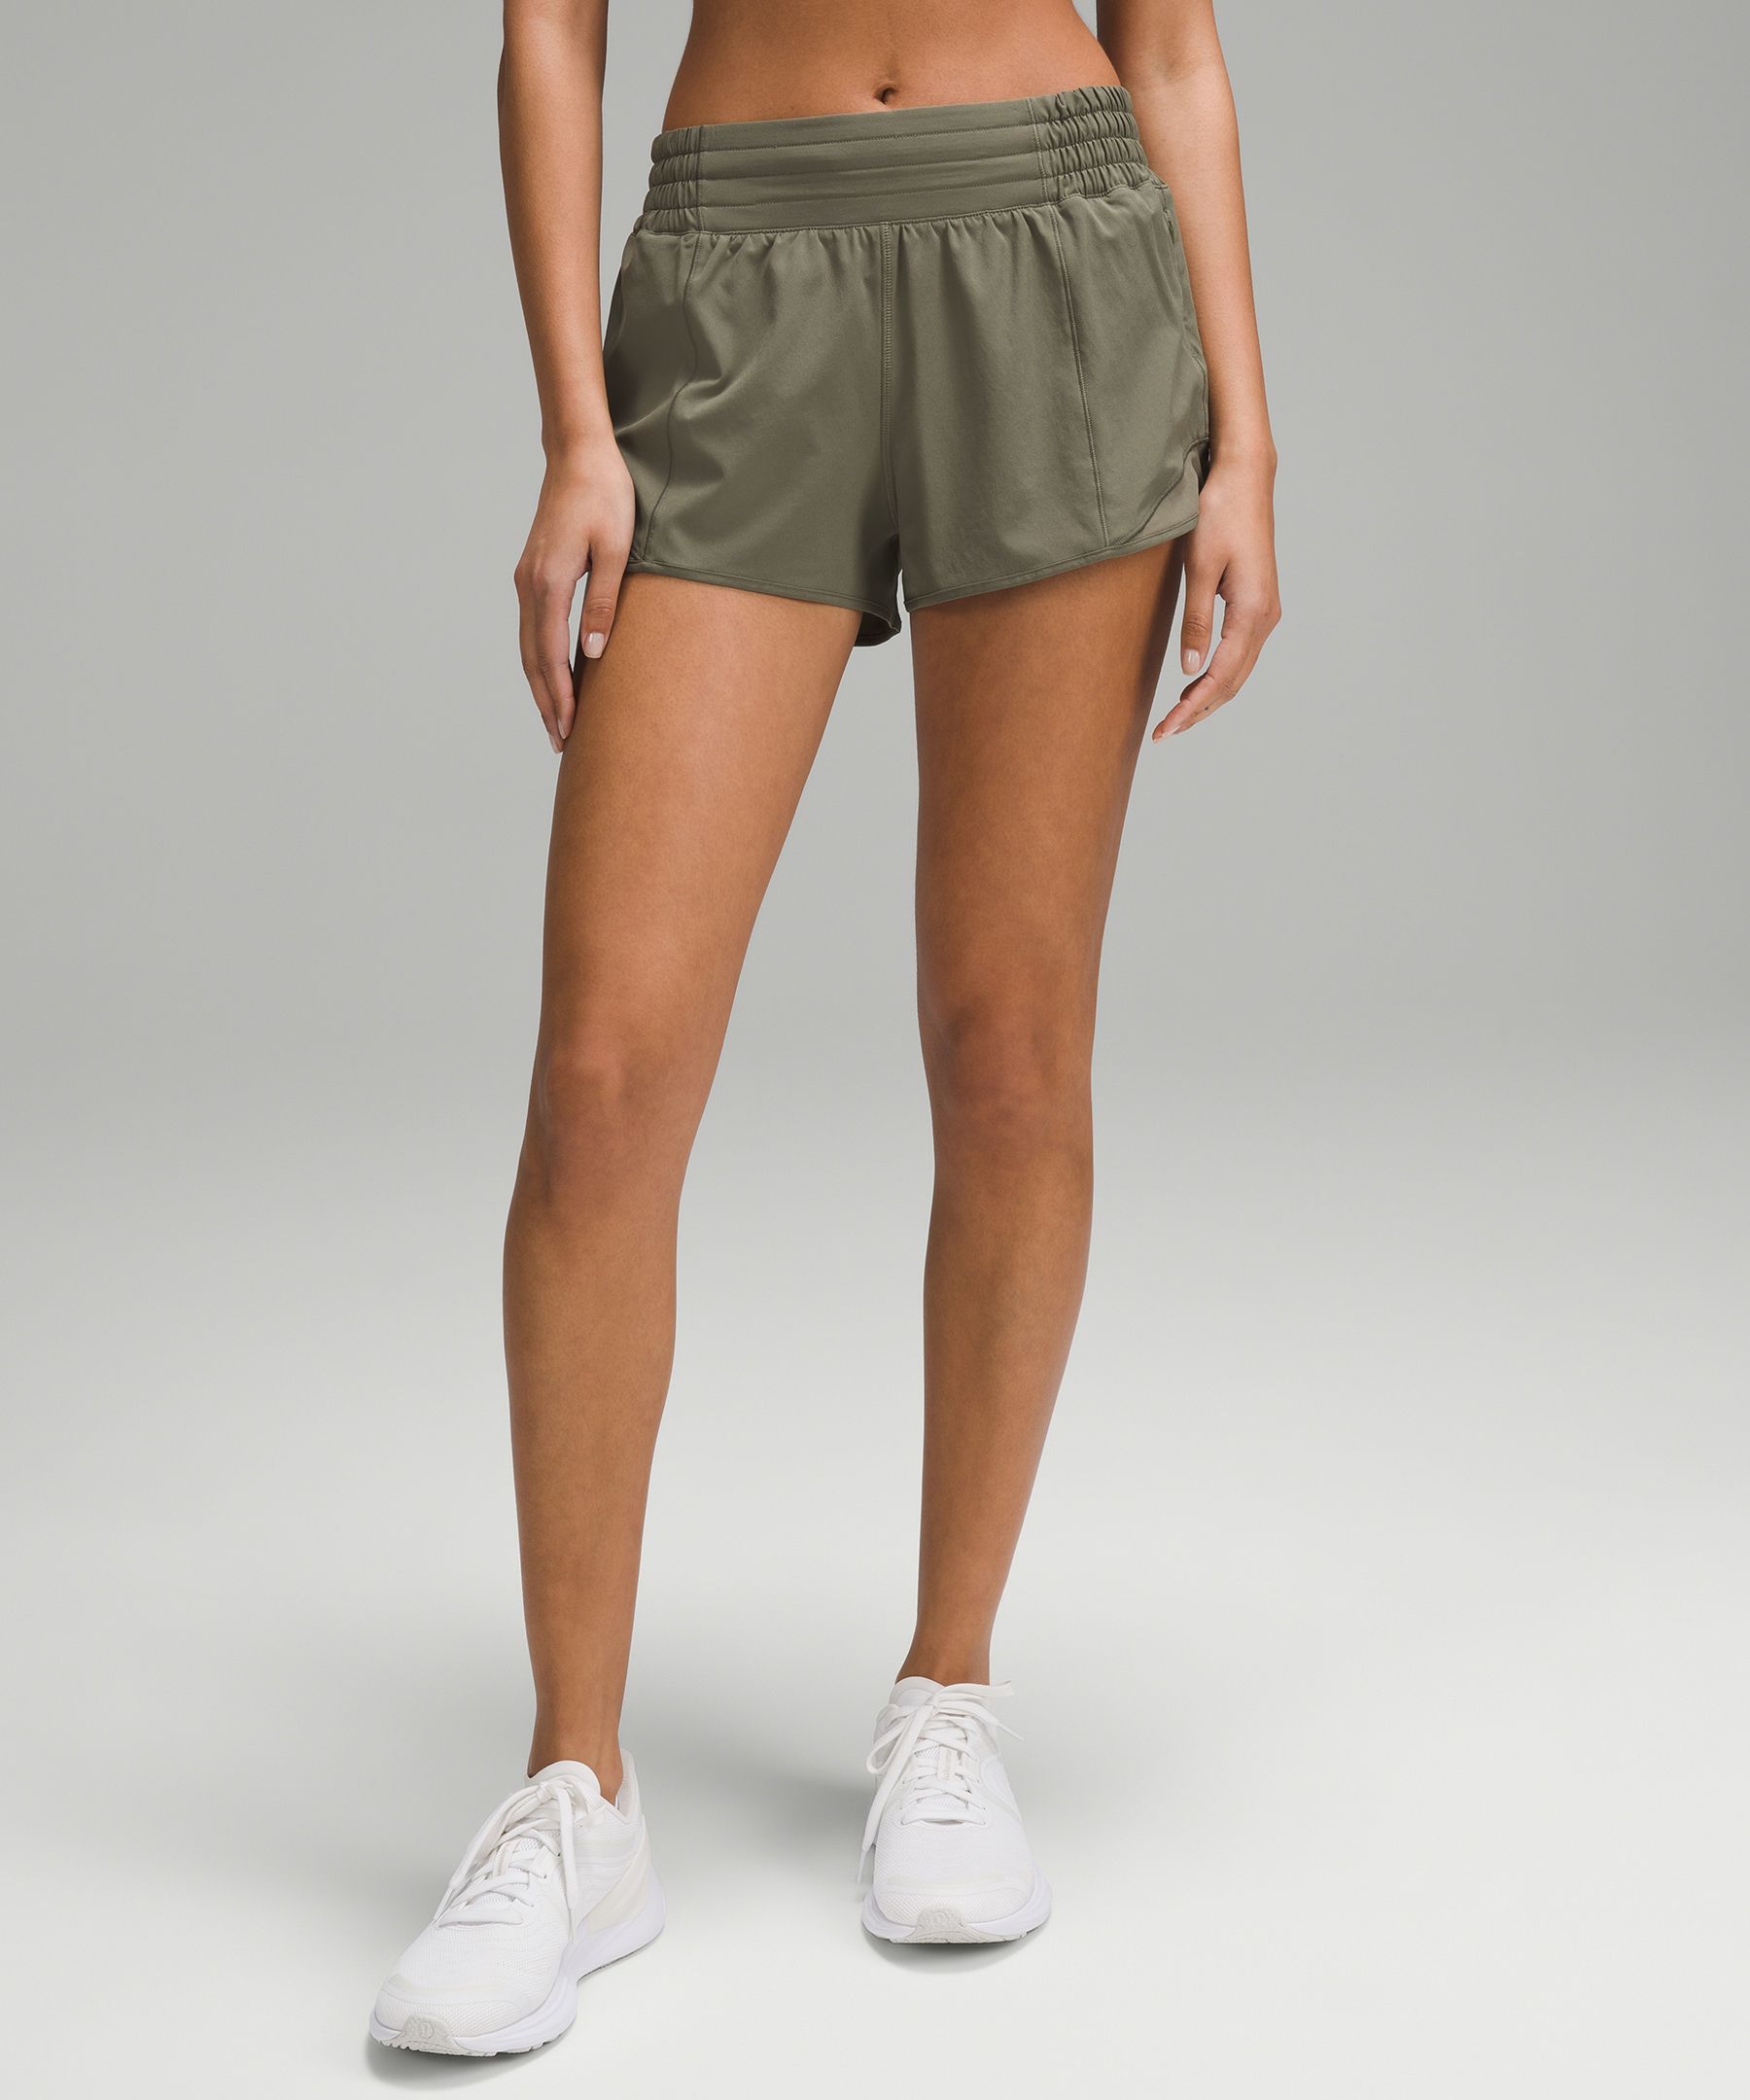 Hotty Hot High-Rise Lined Short 2.5